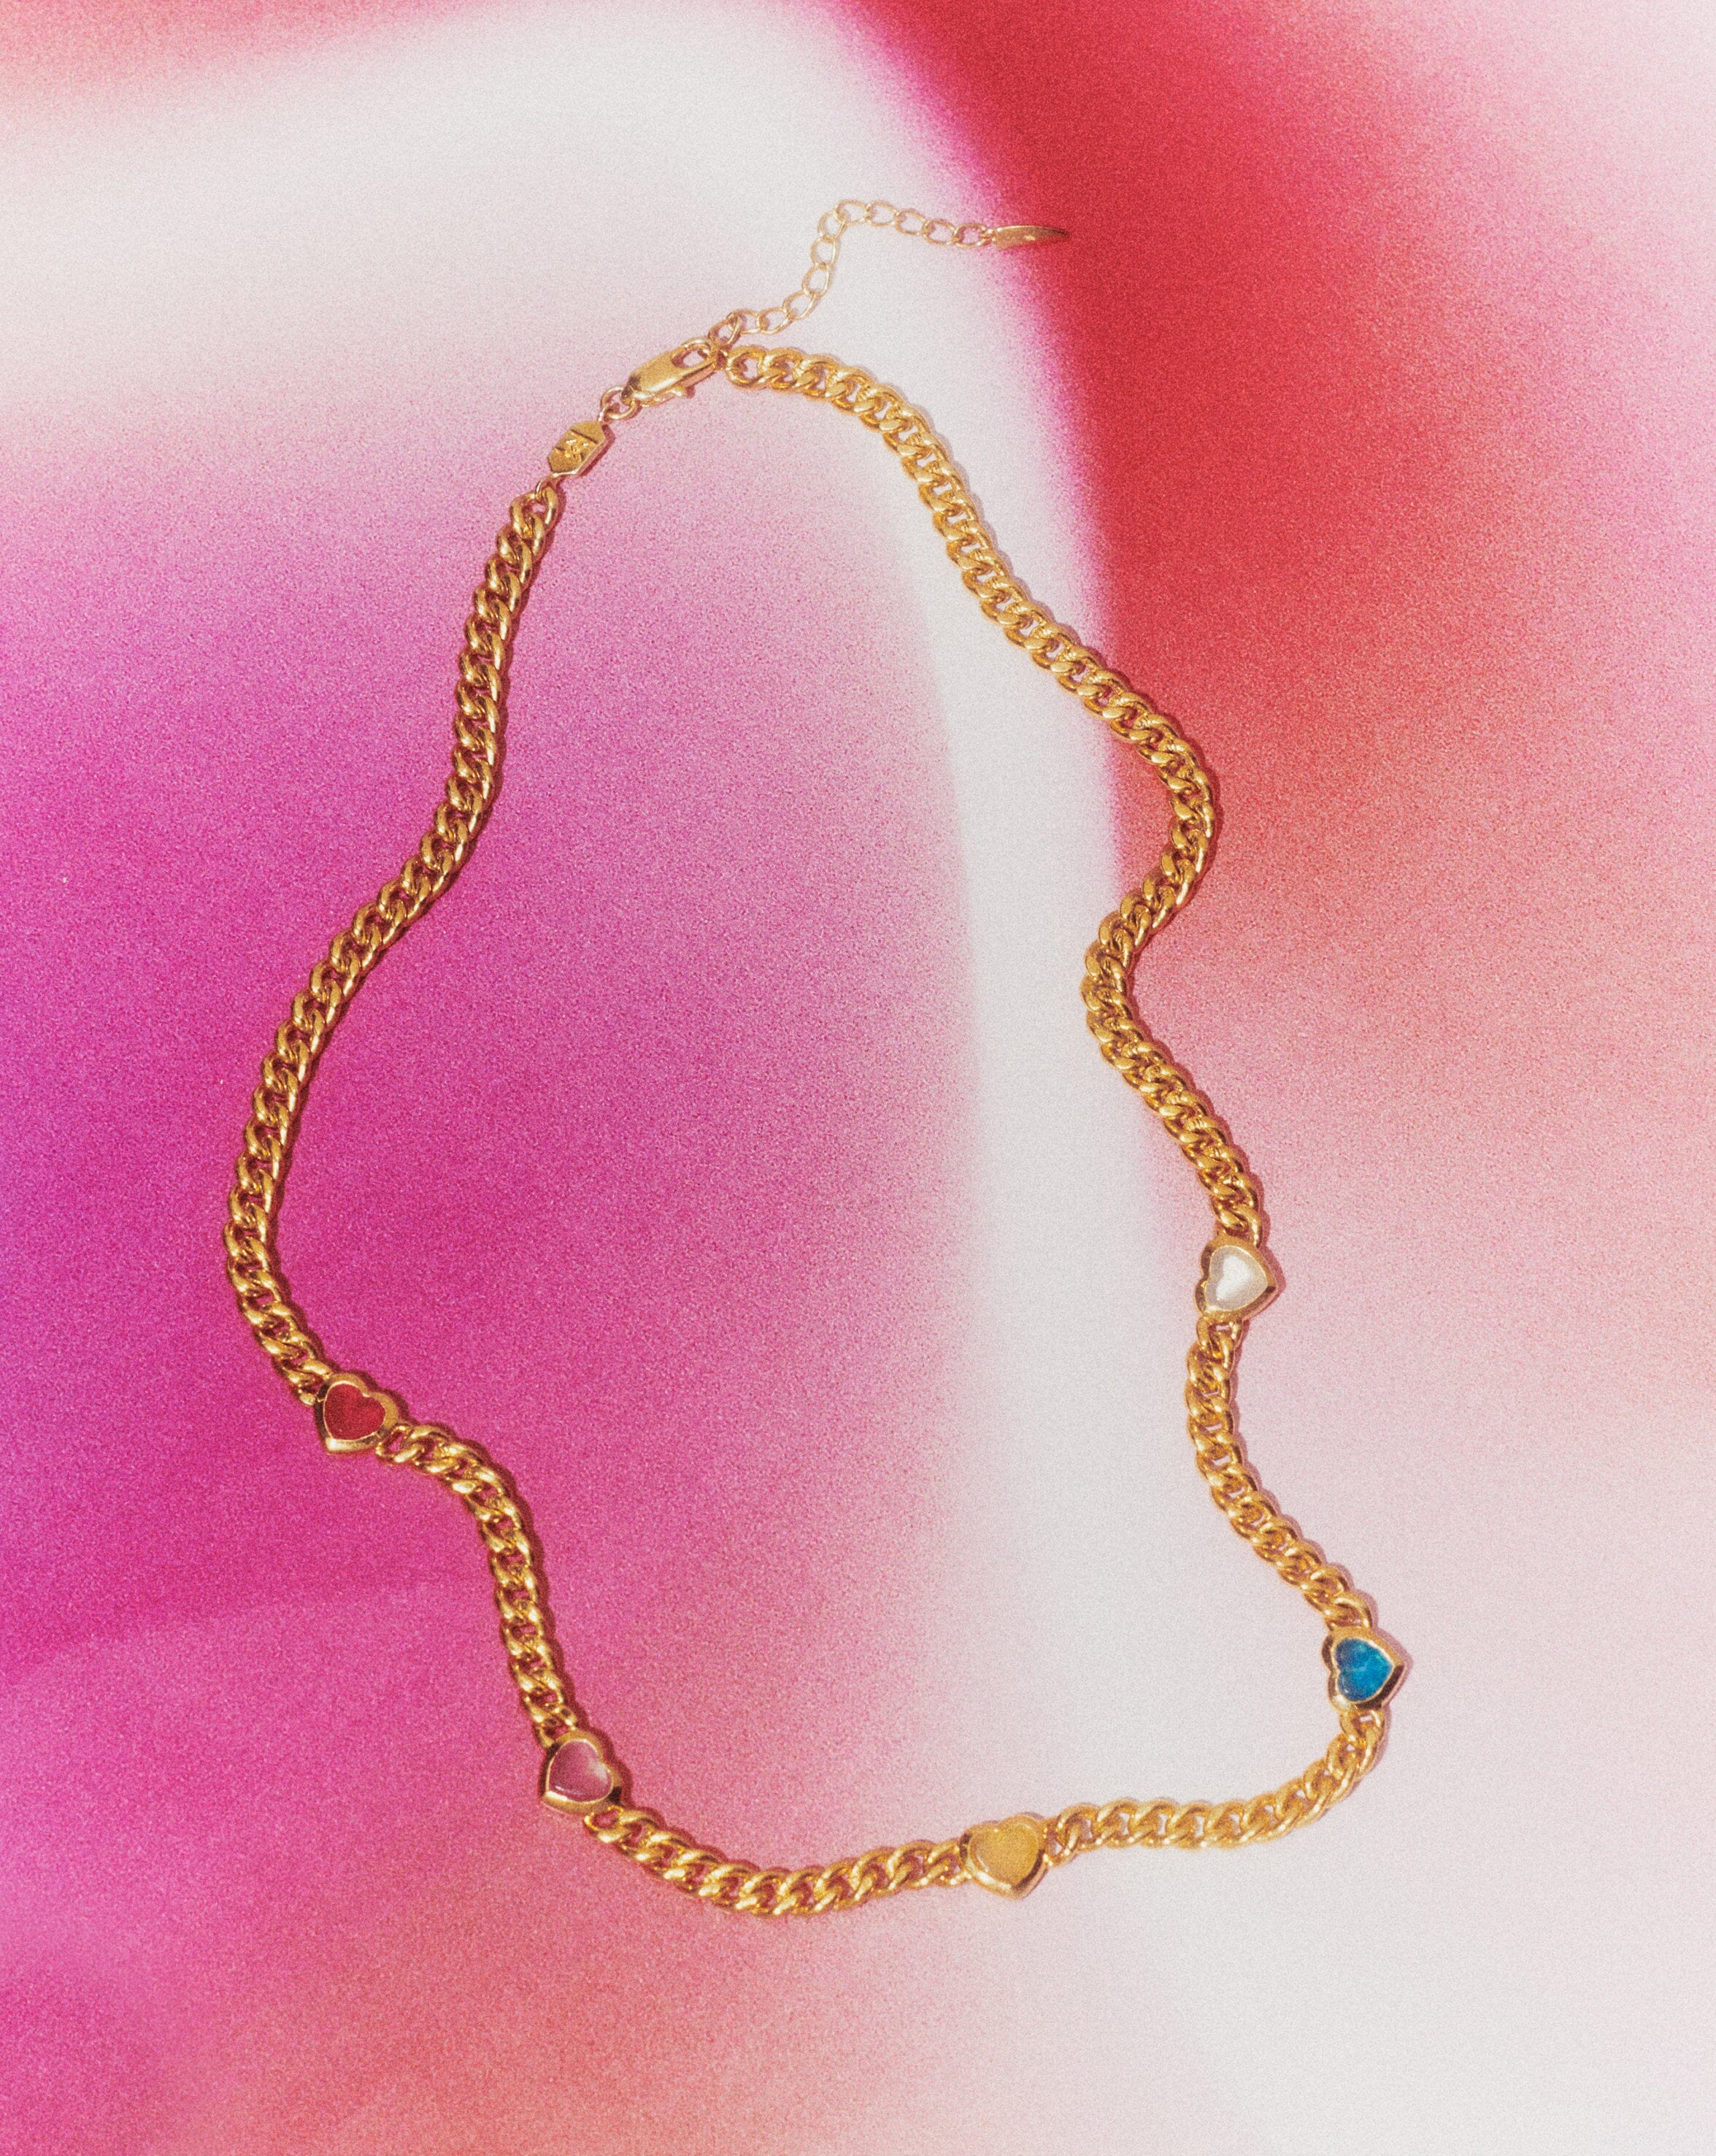 Carbon & Hyde Rose Gold Rainbow Gemstone Necklace | J.R. Dunn Jewelers